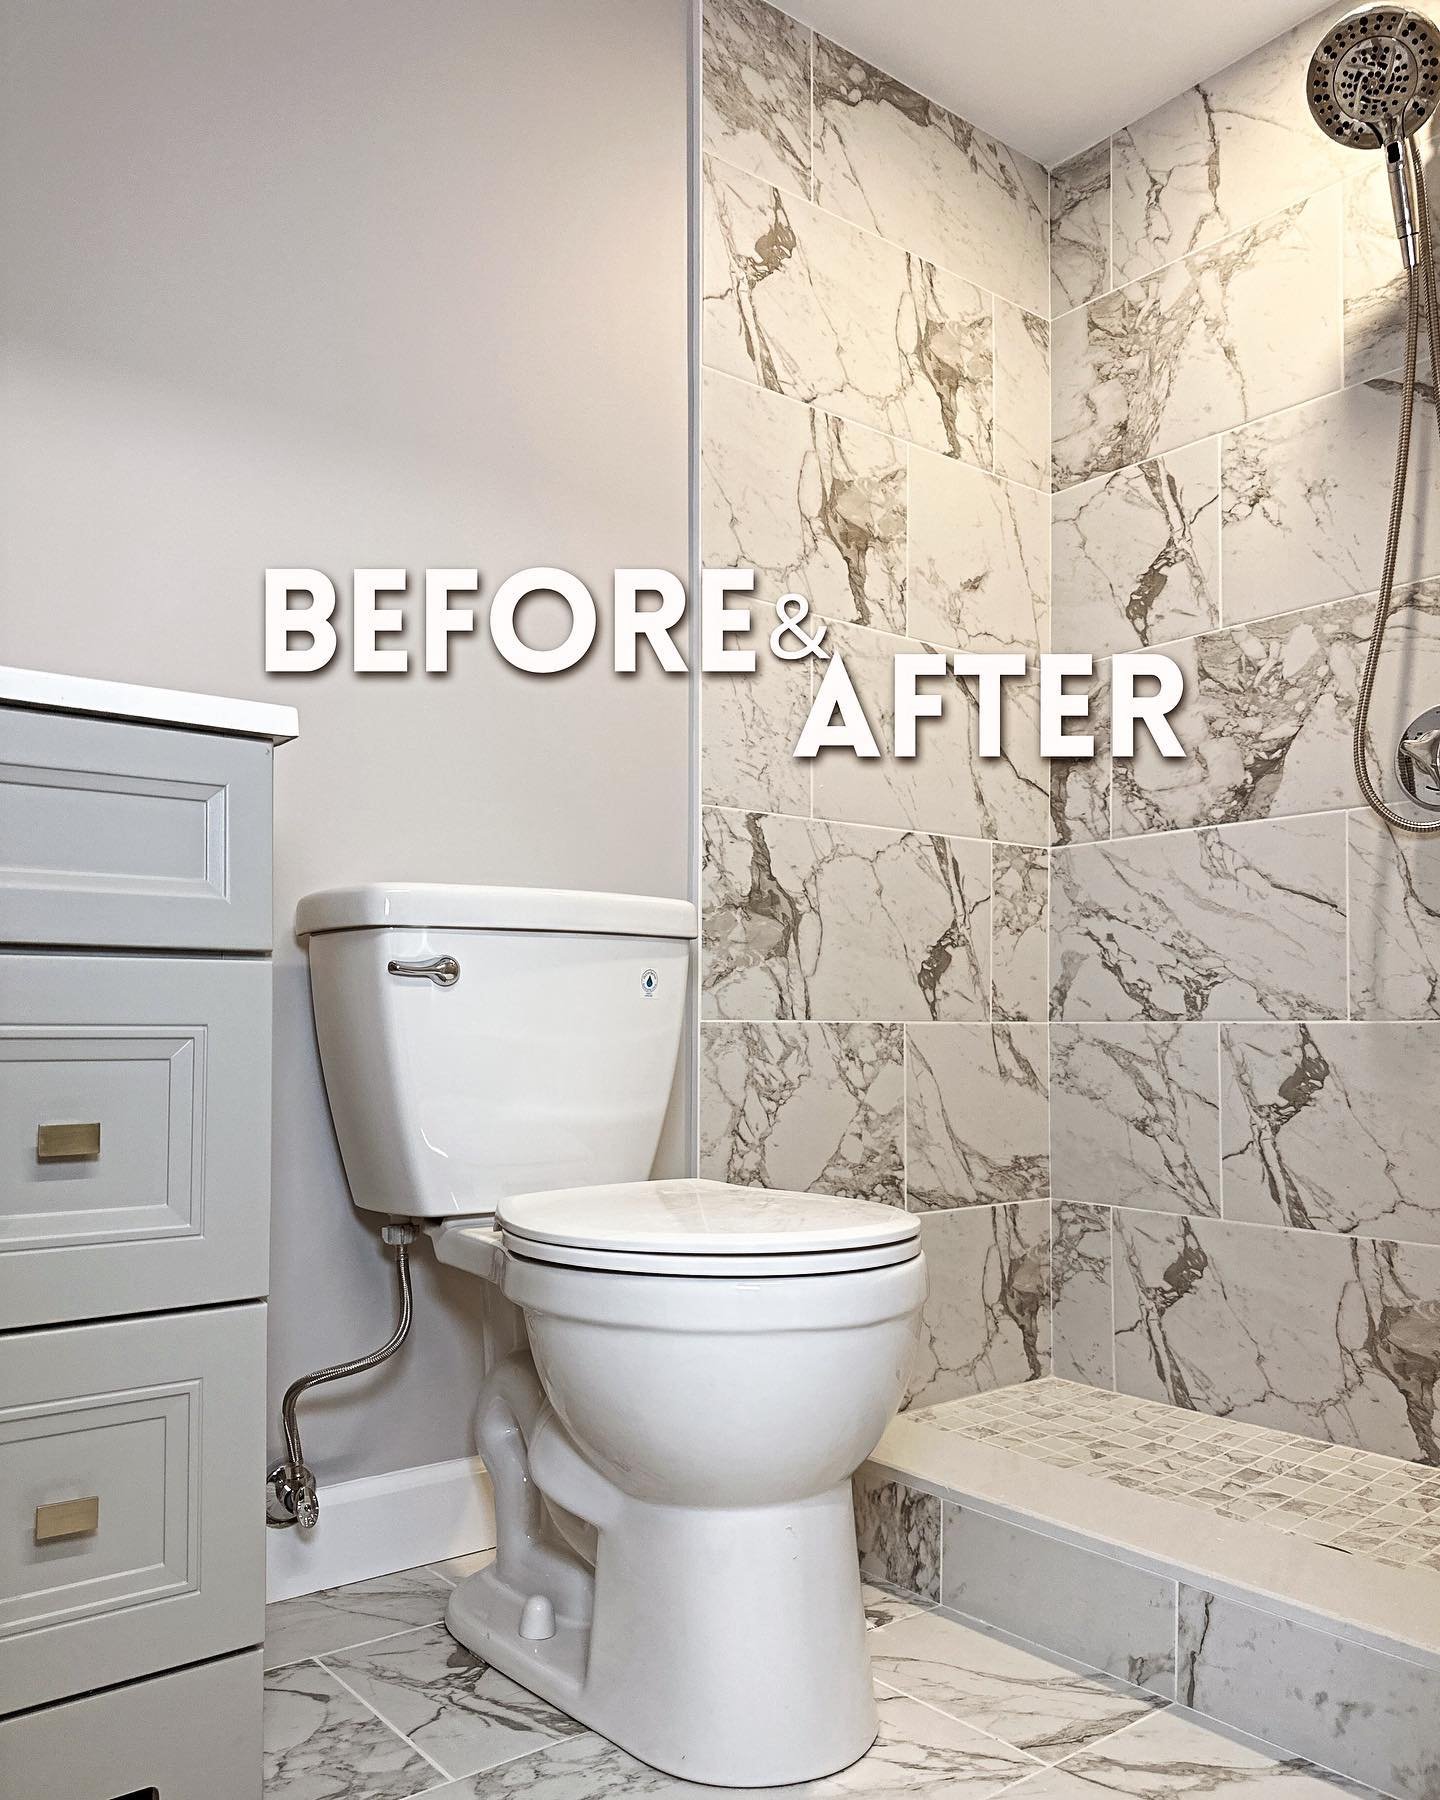 Bathroom renovation ✨ Before and after 👉🏻
.
Needing to renovate? Contact us! 
.
.
#renovations #construction #bathroom #dreamhouse #family #petlovers